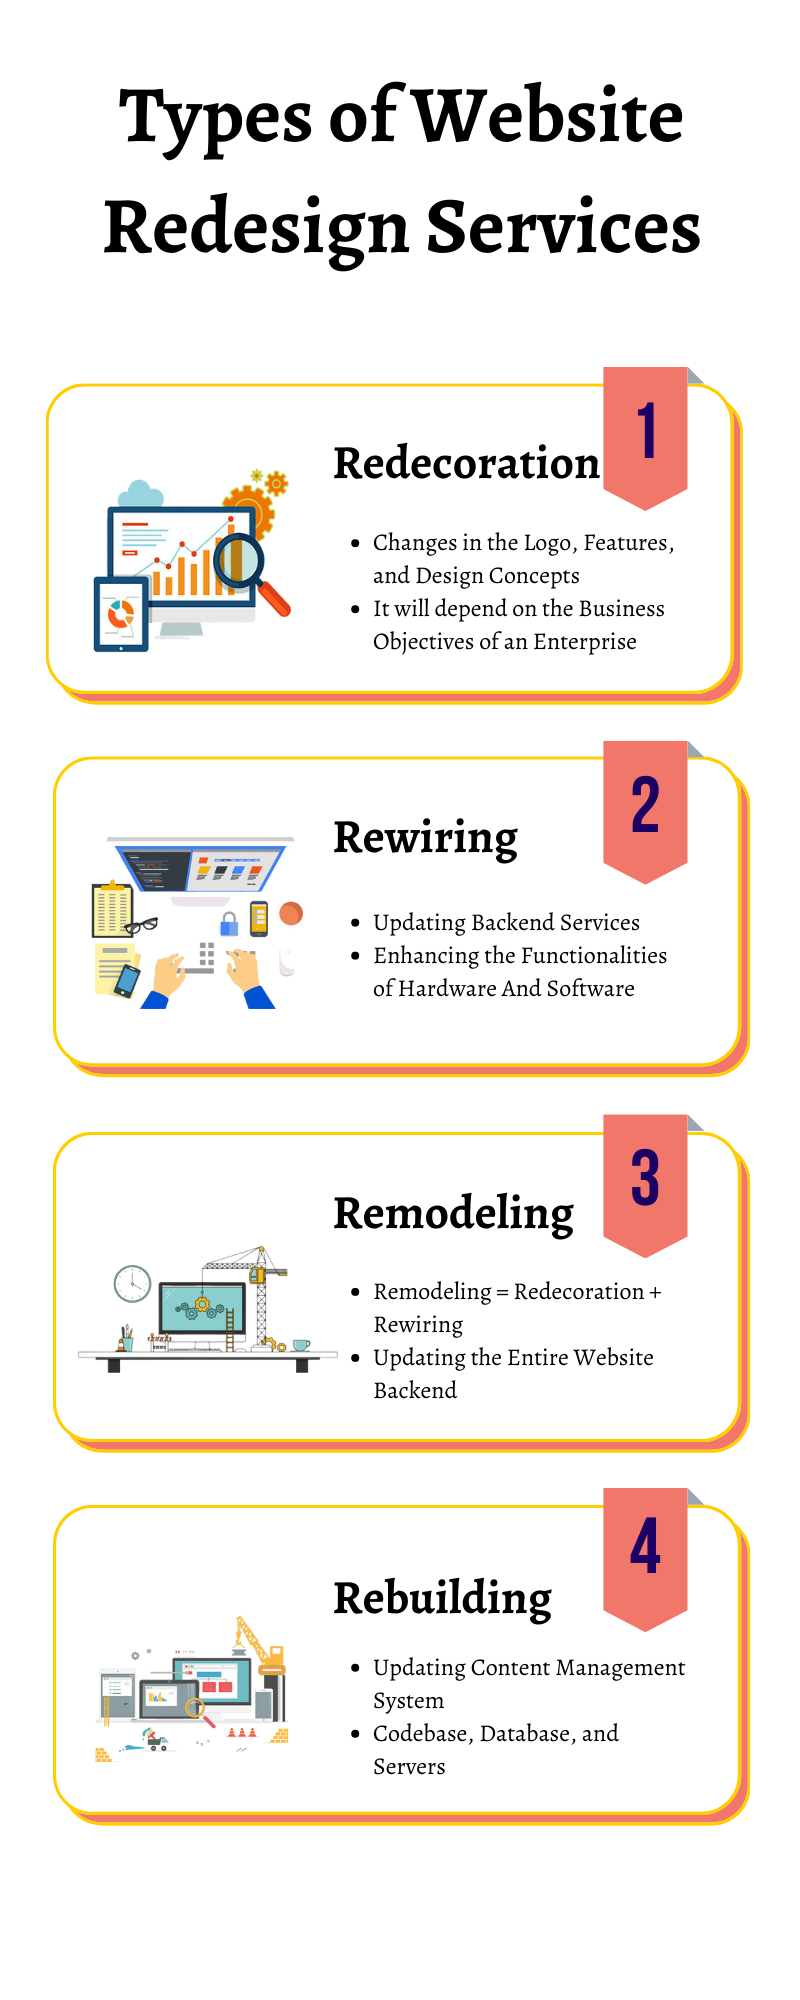 Types of Website Redesign Services